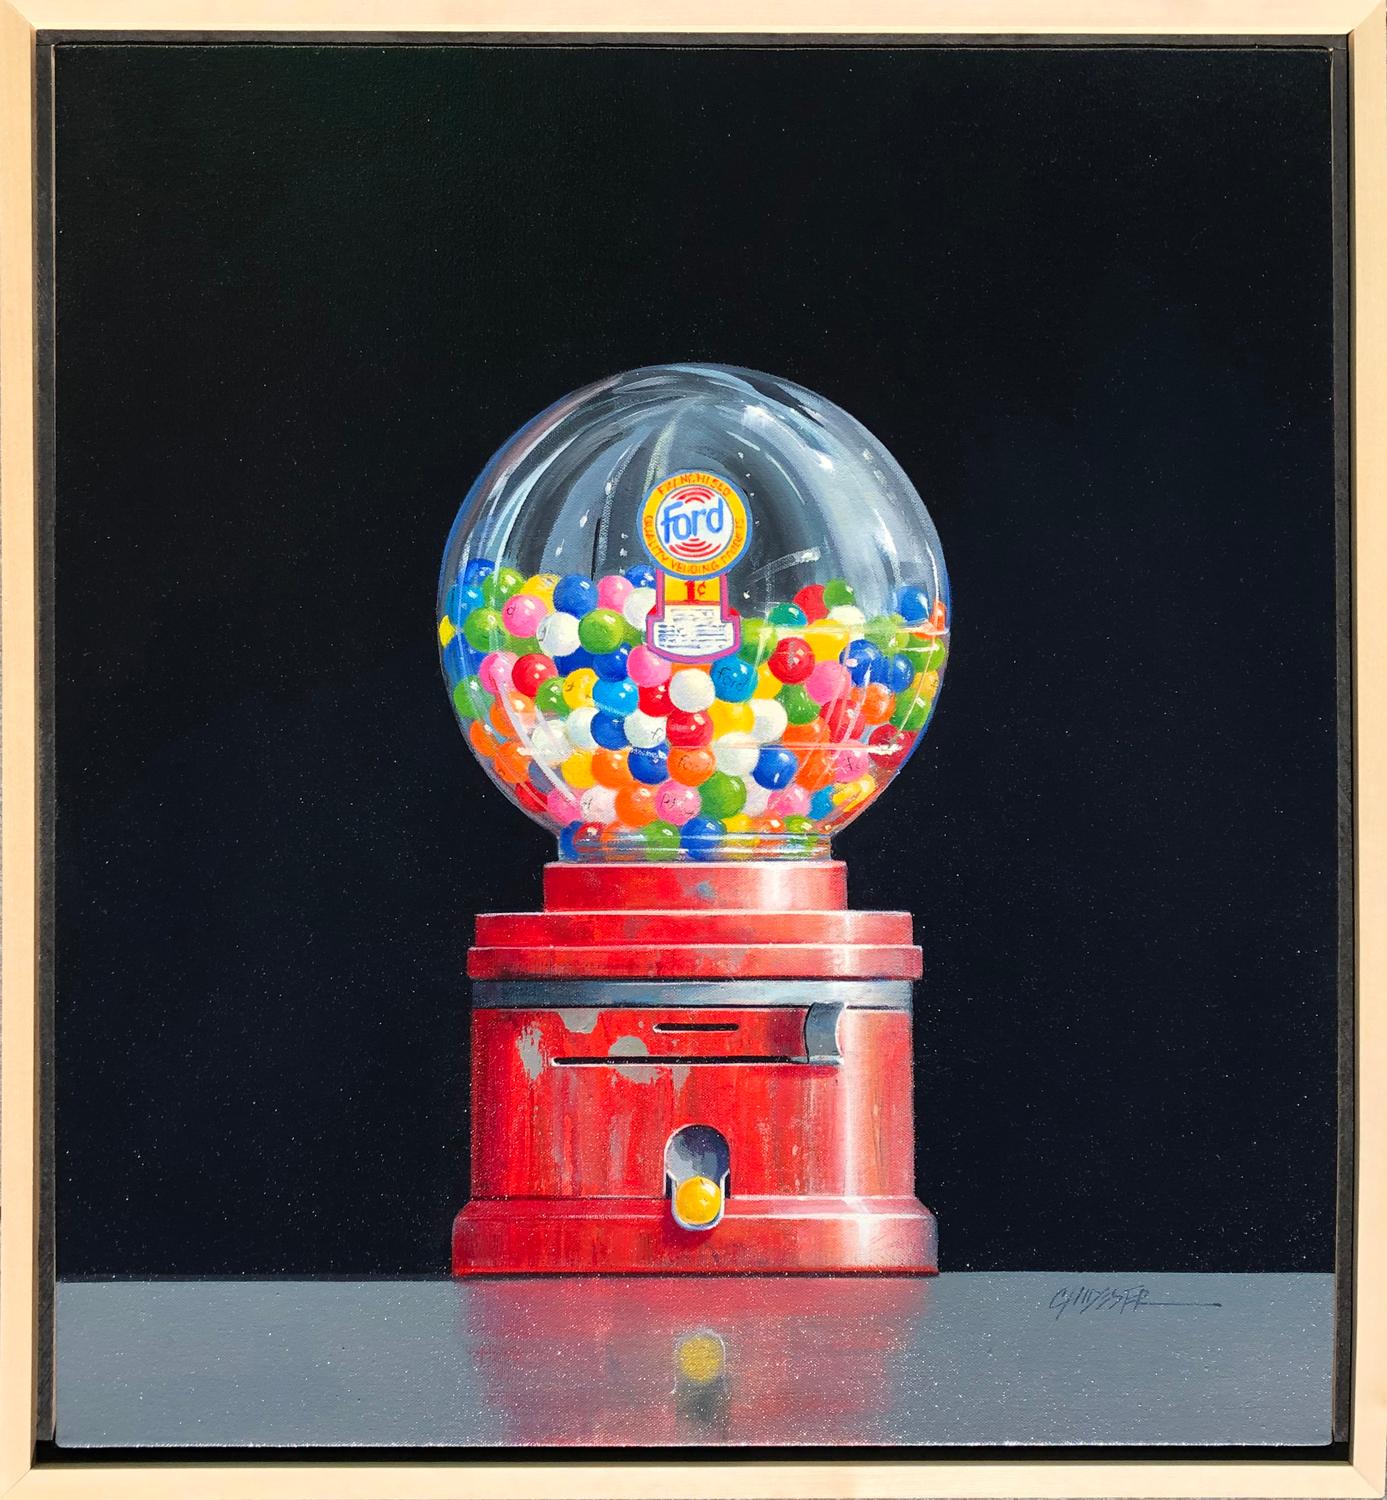 Ford Gum-ball - Painting by Wendy Chidester